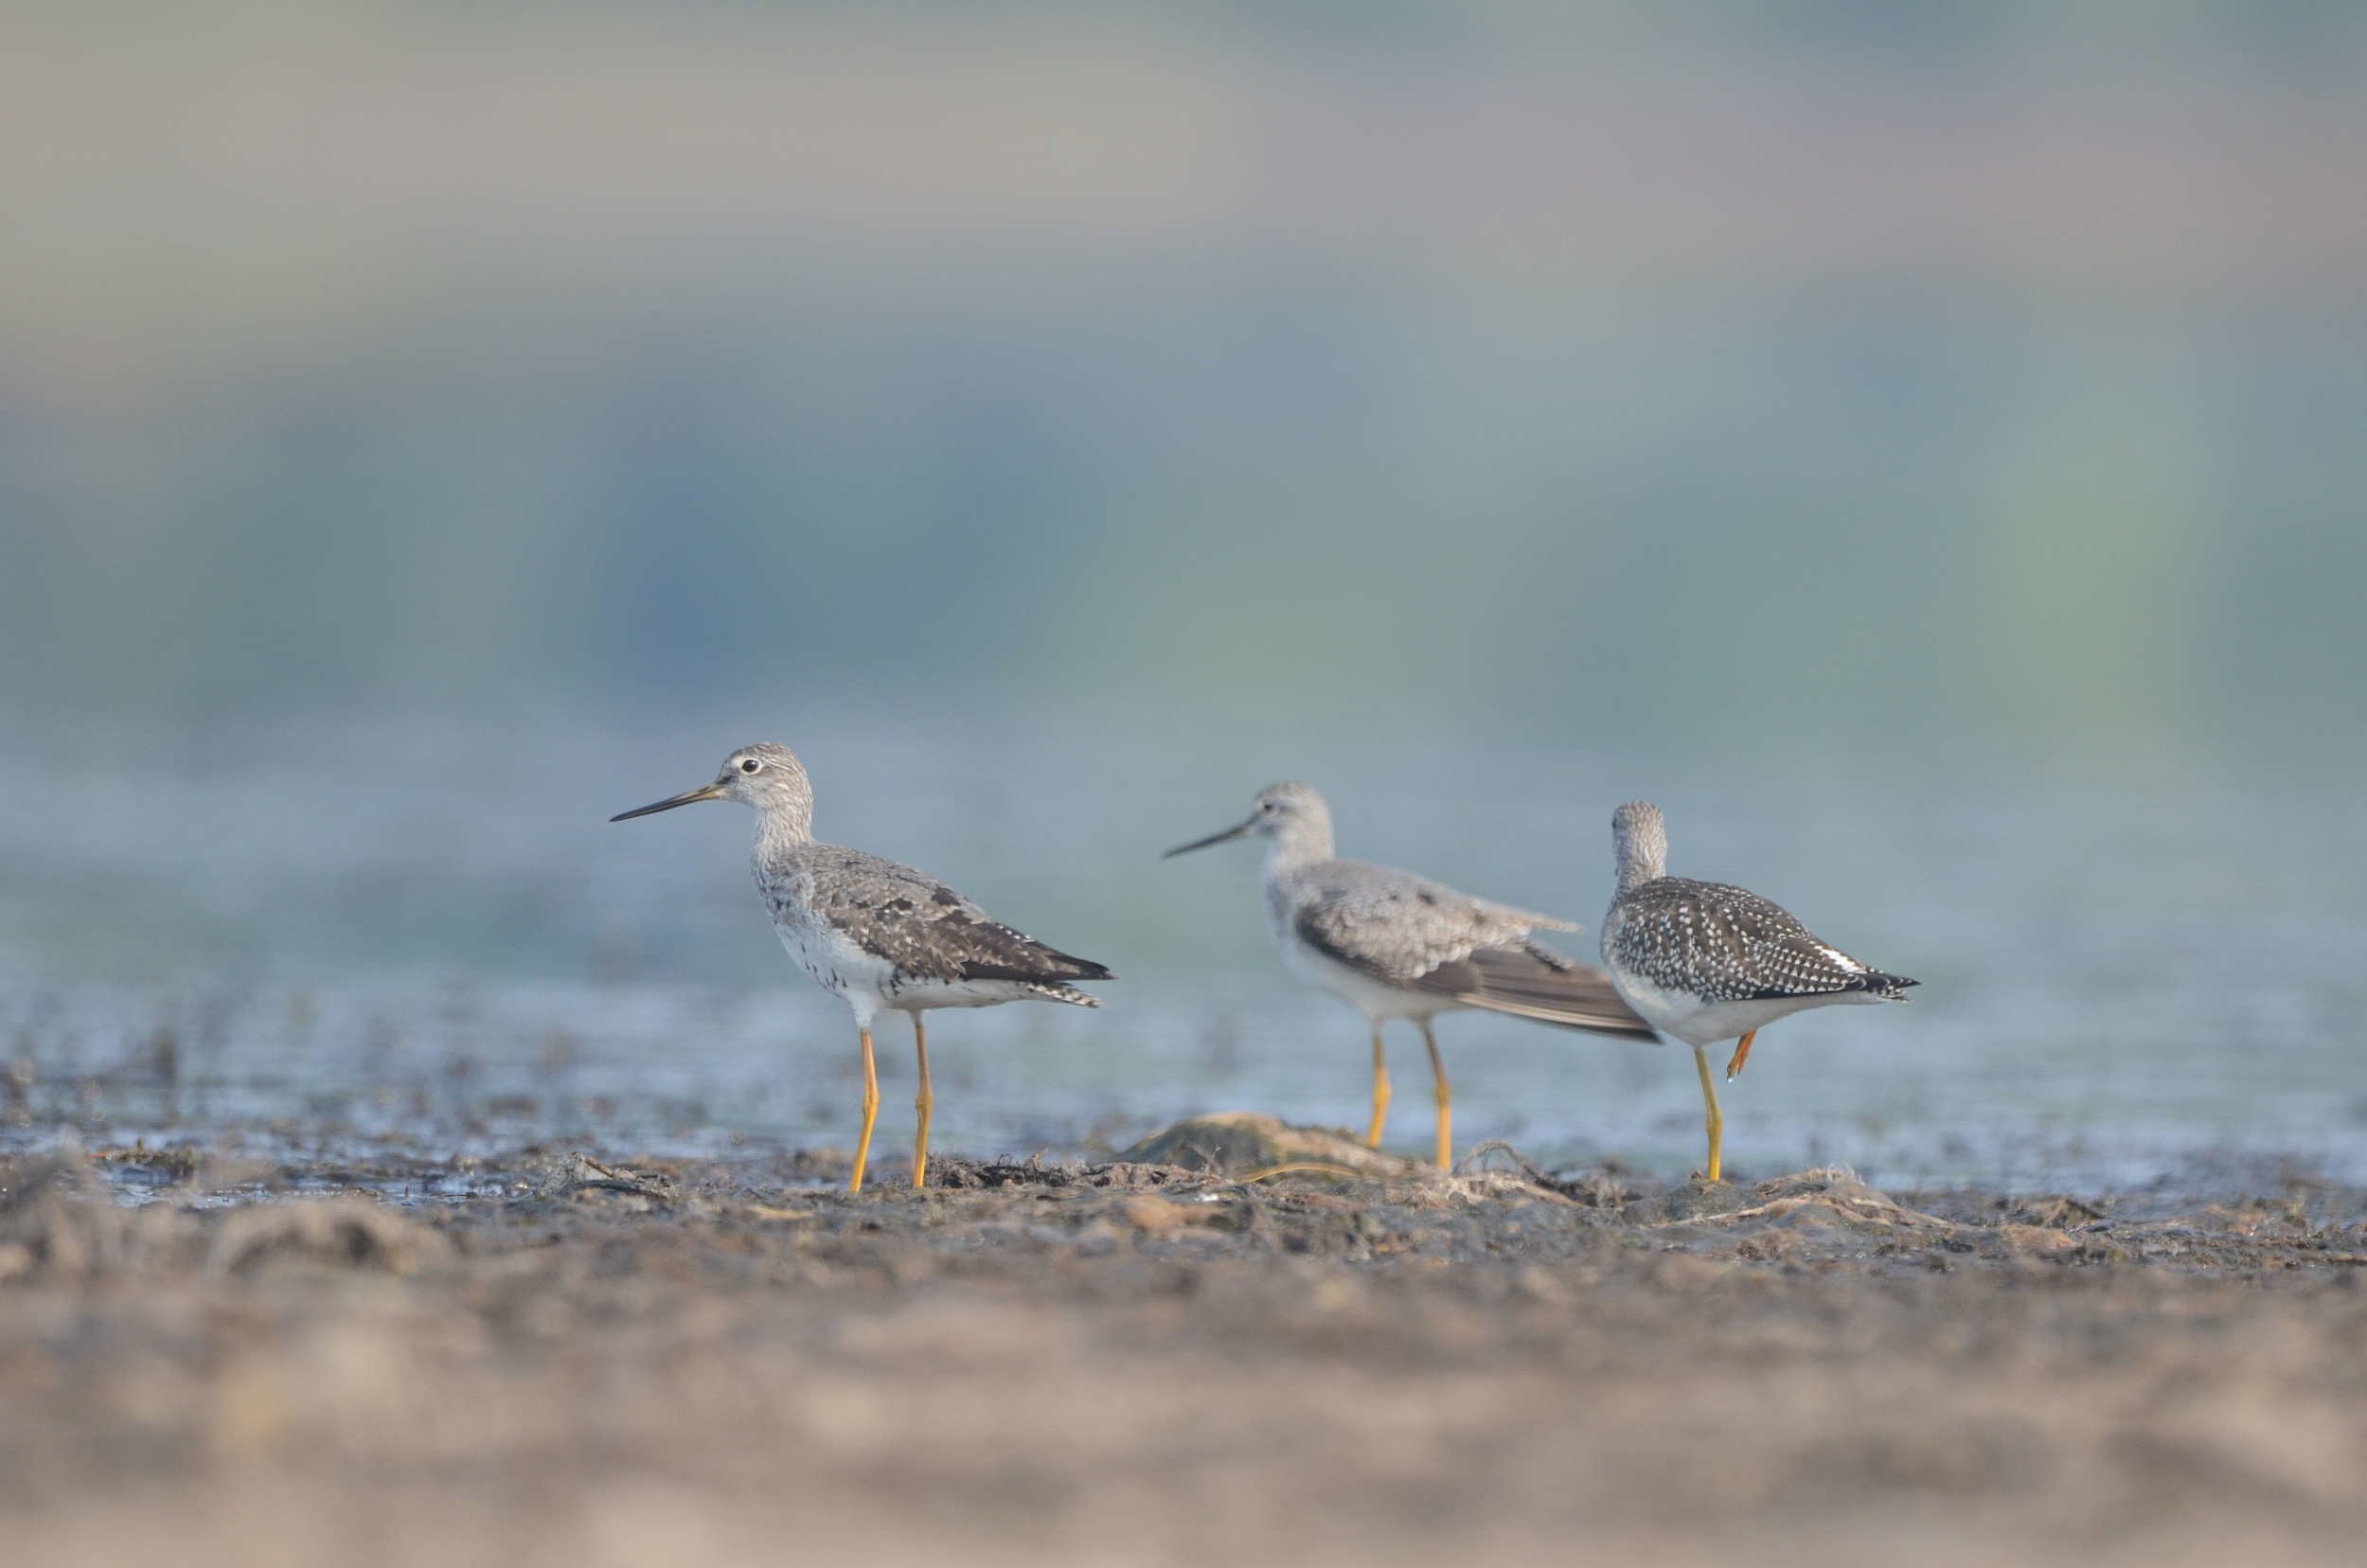 Three Greater Yellowlegs pause on a mudflat. (photo © Eric Masterson)